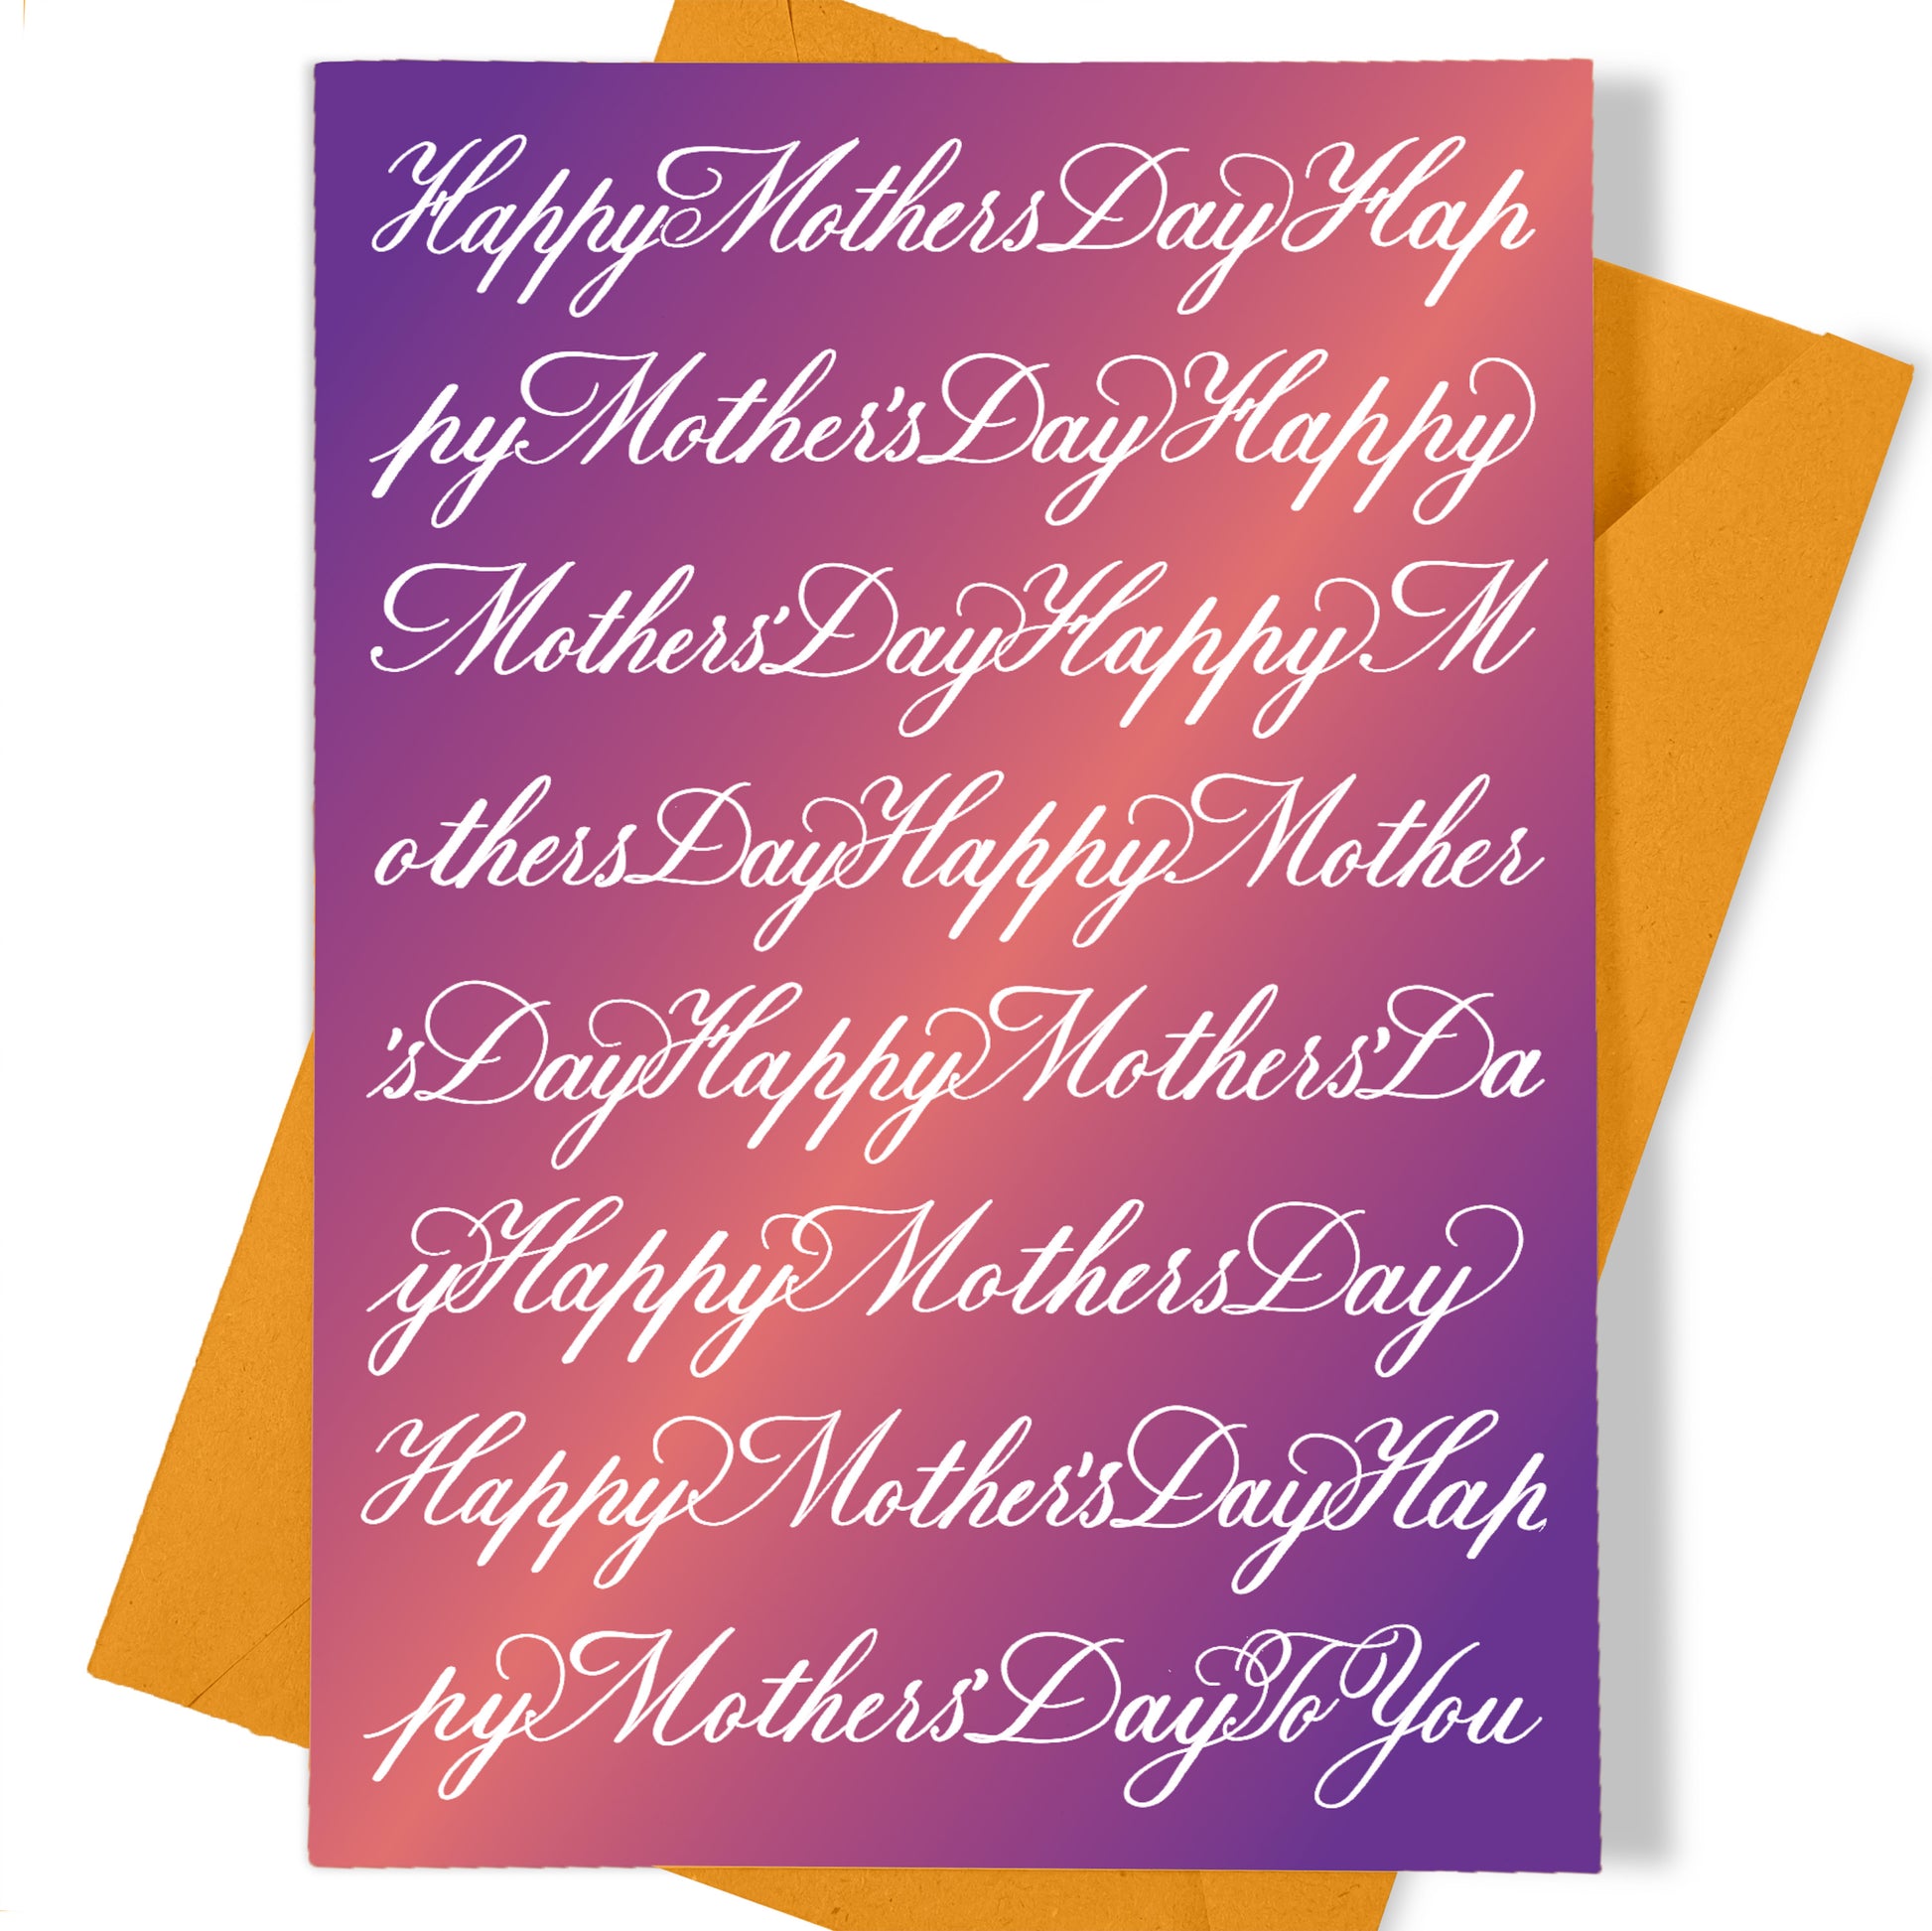 A thumbnail view of the greeting card: "Happy Mothers Day to You"